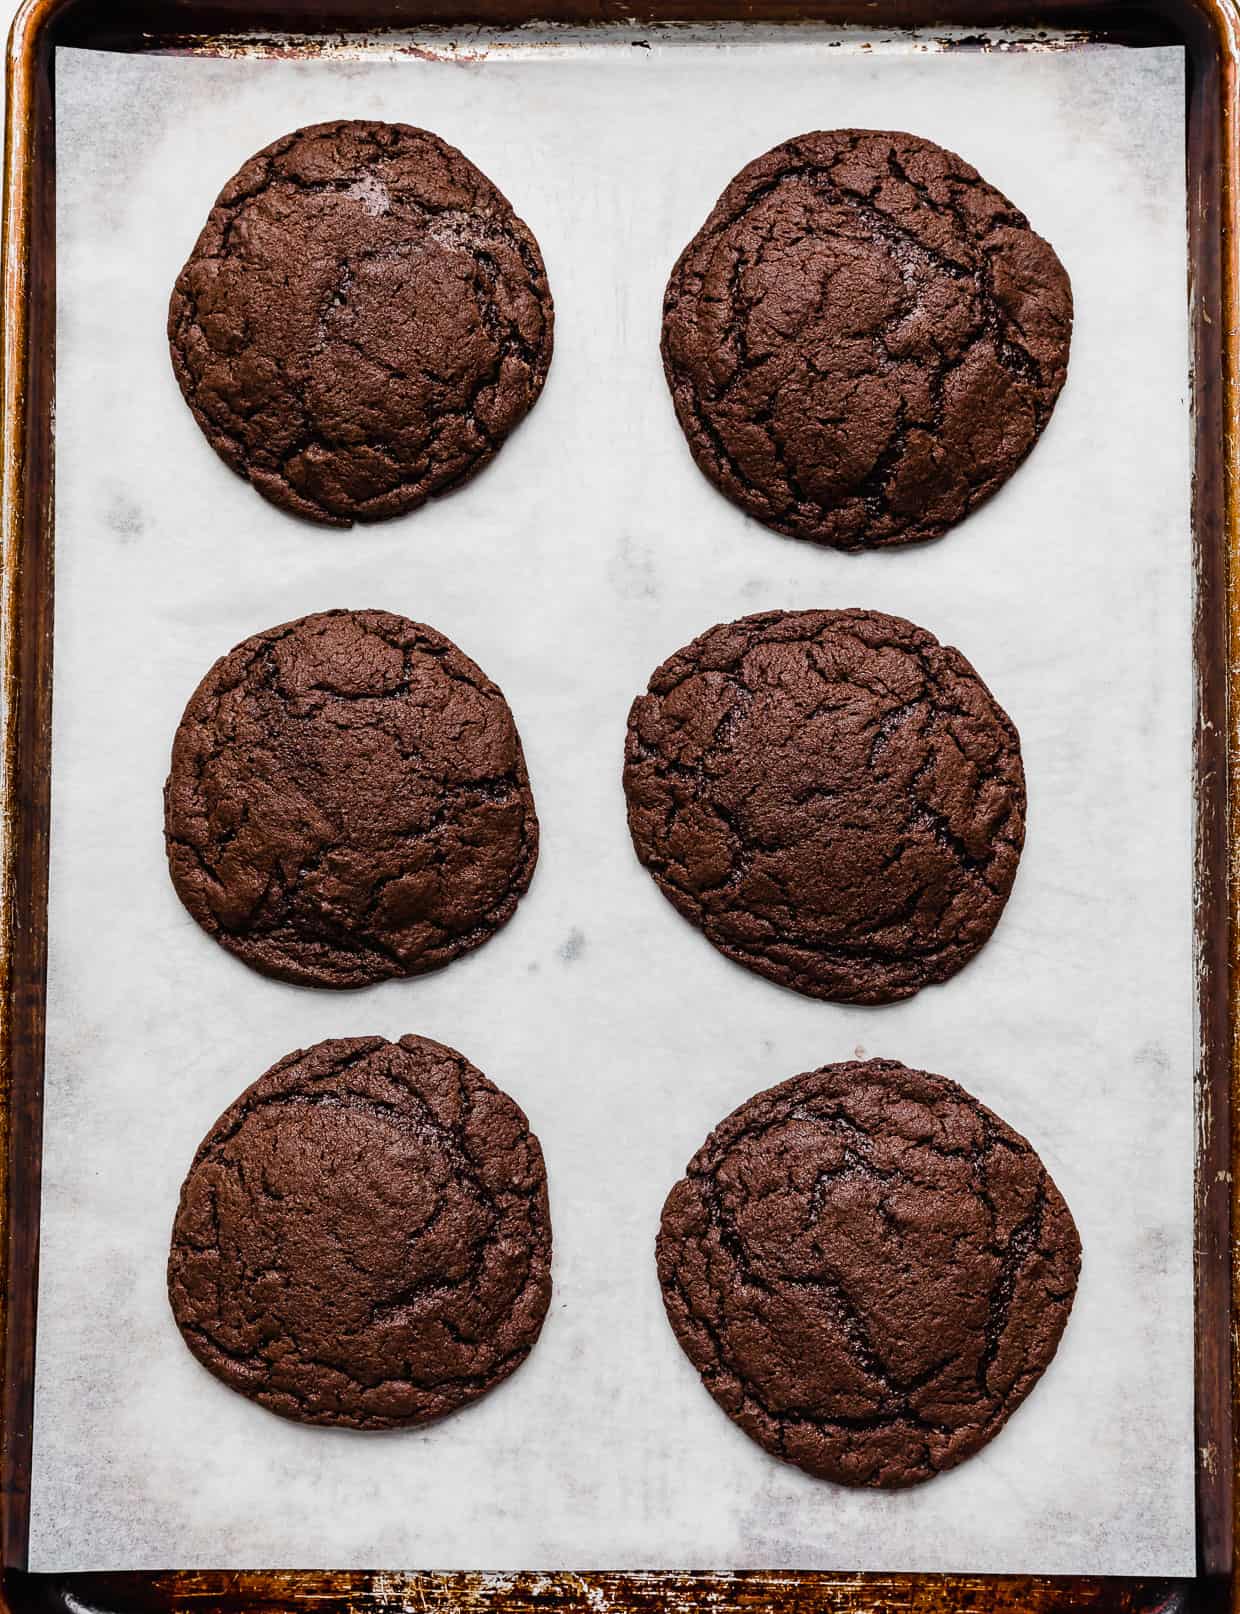 Six baked chocolate cookies on a white parchment paper.